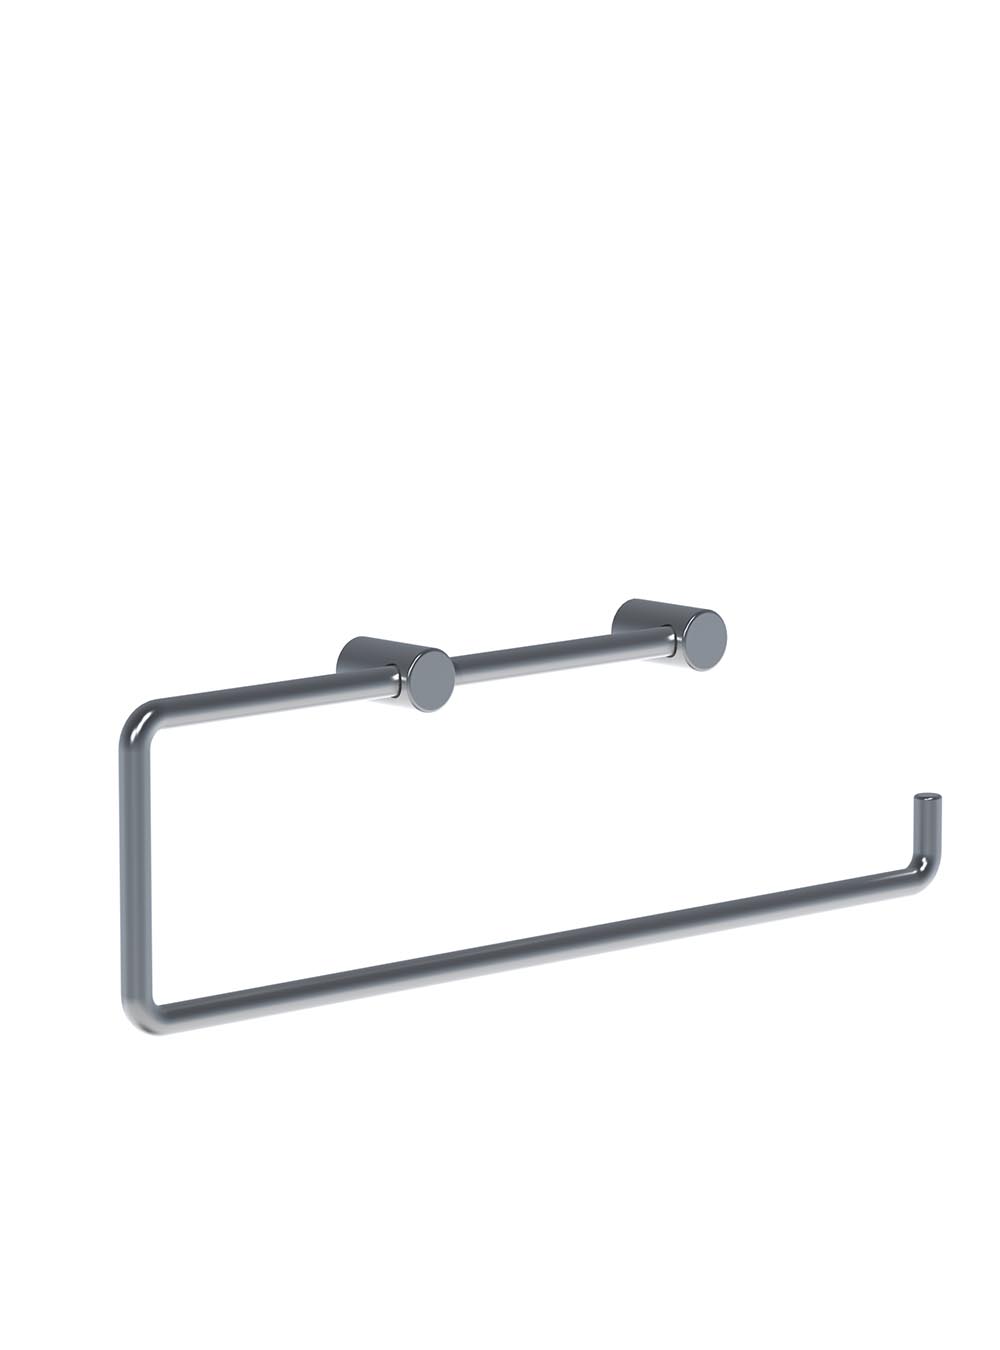 T13L-BP: Double toilet roll holder or kitchen roll holder, 187 mm. Without back plate.